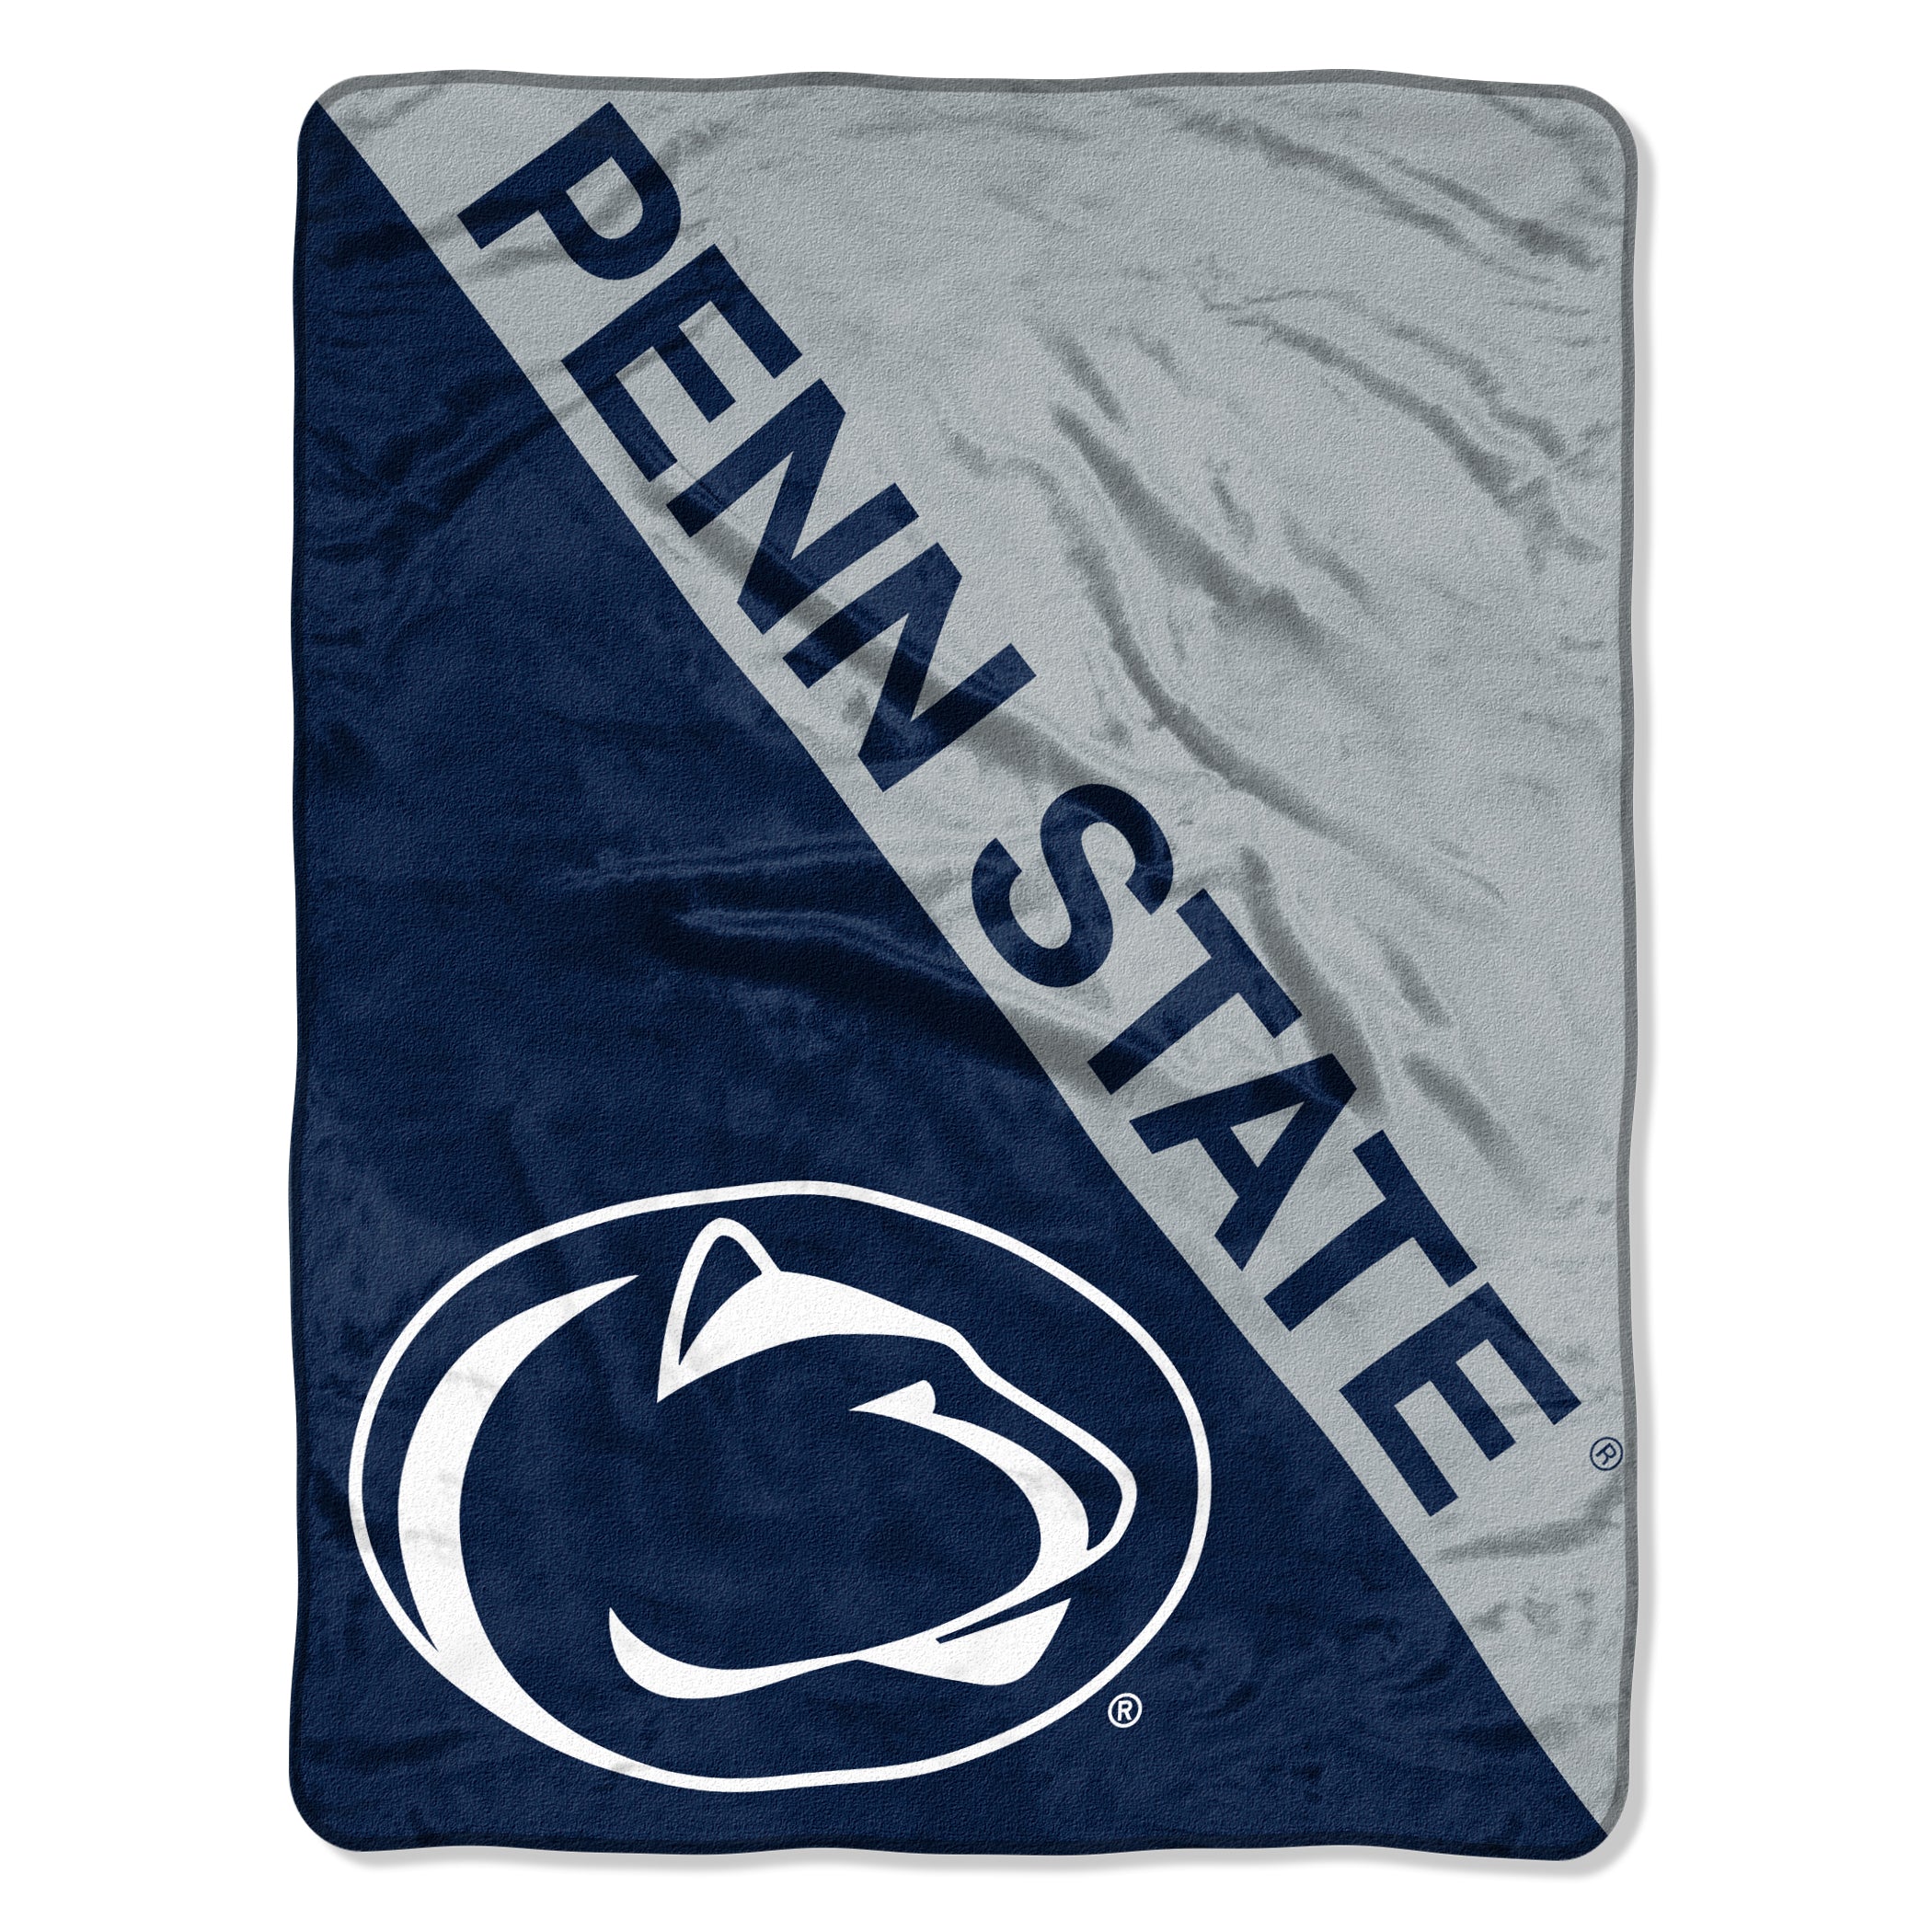 Penn State Nittany Lions Blanket 46x60 Micro Raschel Halftone Design Rolled - Special Order